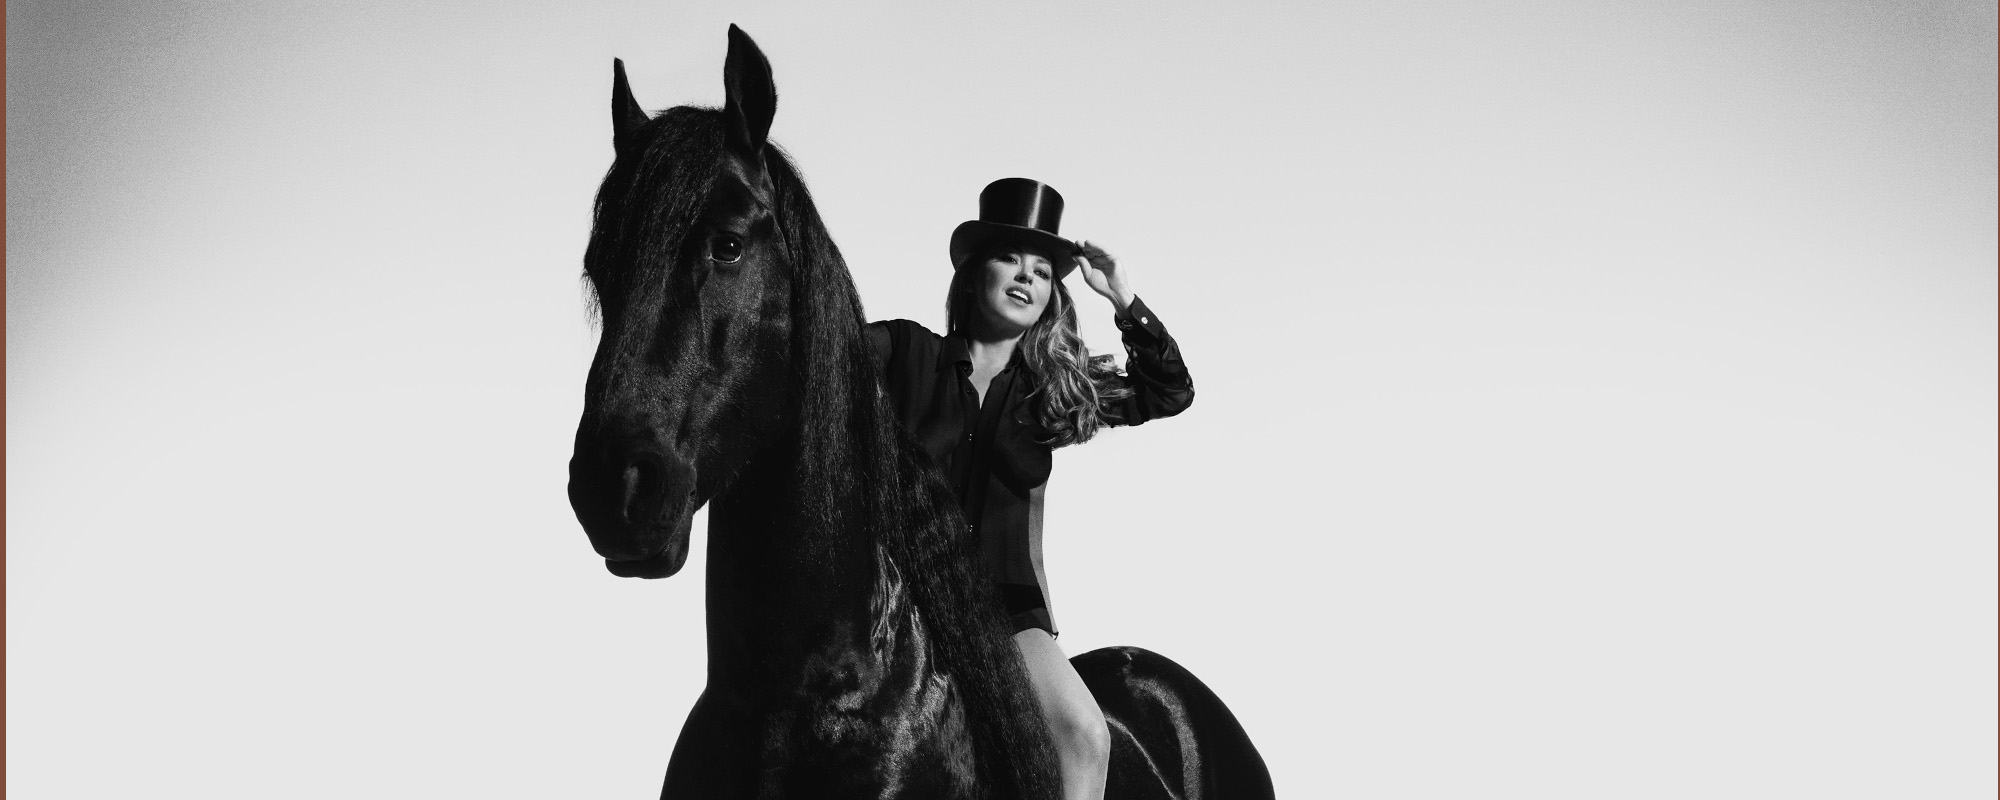 Shania Twain Brings the Energy with New Single ‘Giddy Up!’